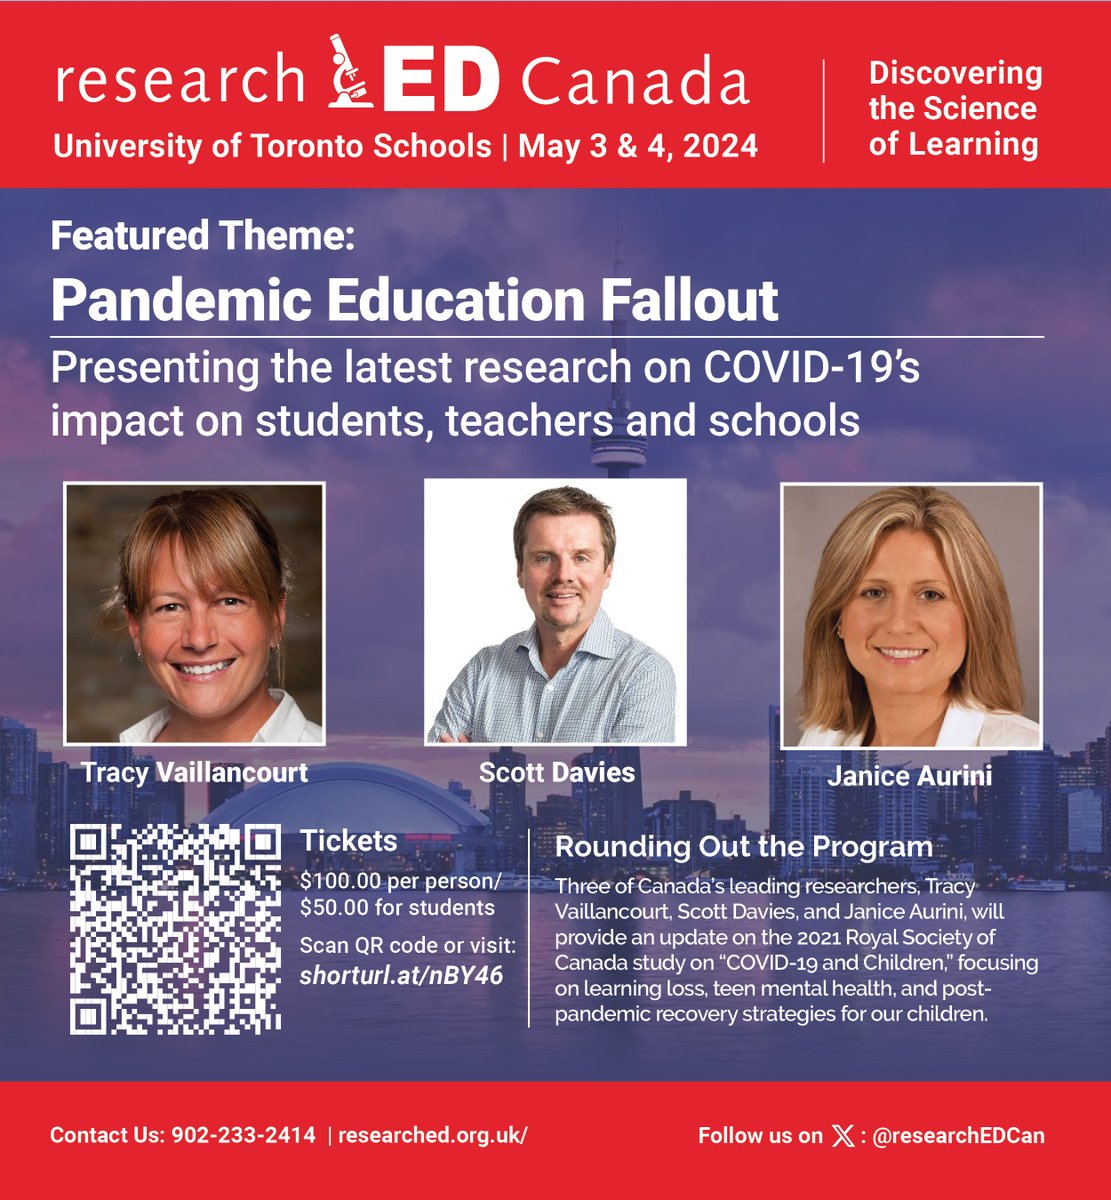 Pandemic Education Fallout - Too Painful to Recall, So Put It Out-of-Your-Mind? A policy wake-up call from Canada's leading researchers @vaillancourt_dr #ScottDavies & #JaniceAurini Hold on, I'm tagging along to introduce the topic. Join us at #rEDTO24 @CSSESCEE @CASEA_ACEAS